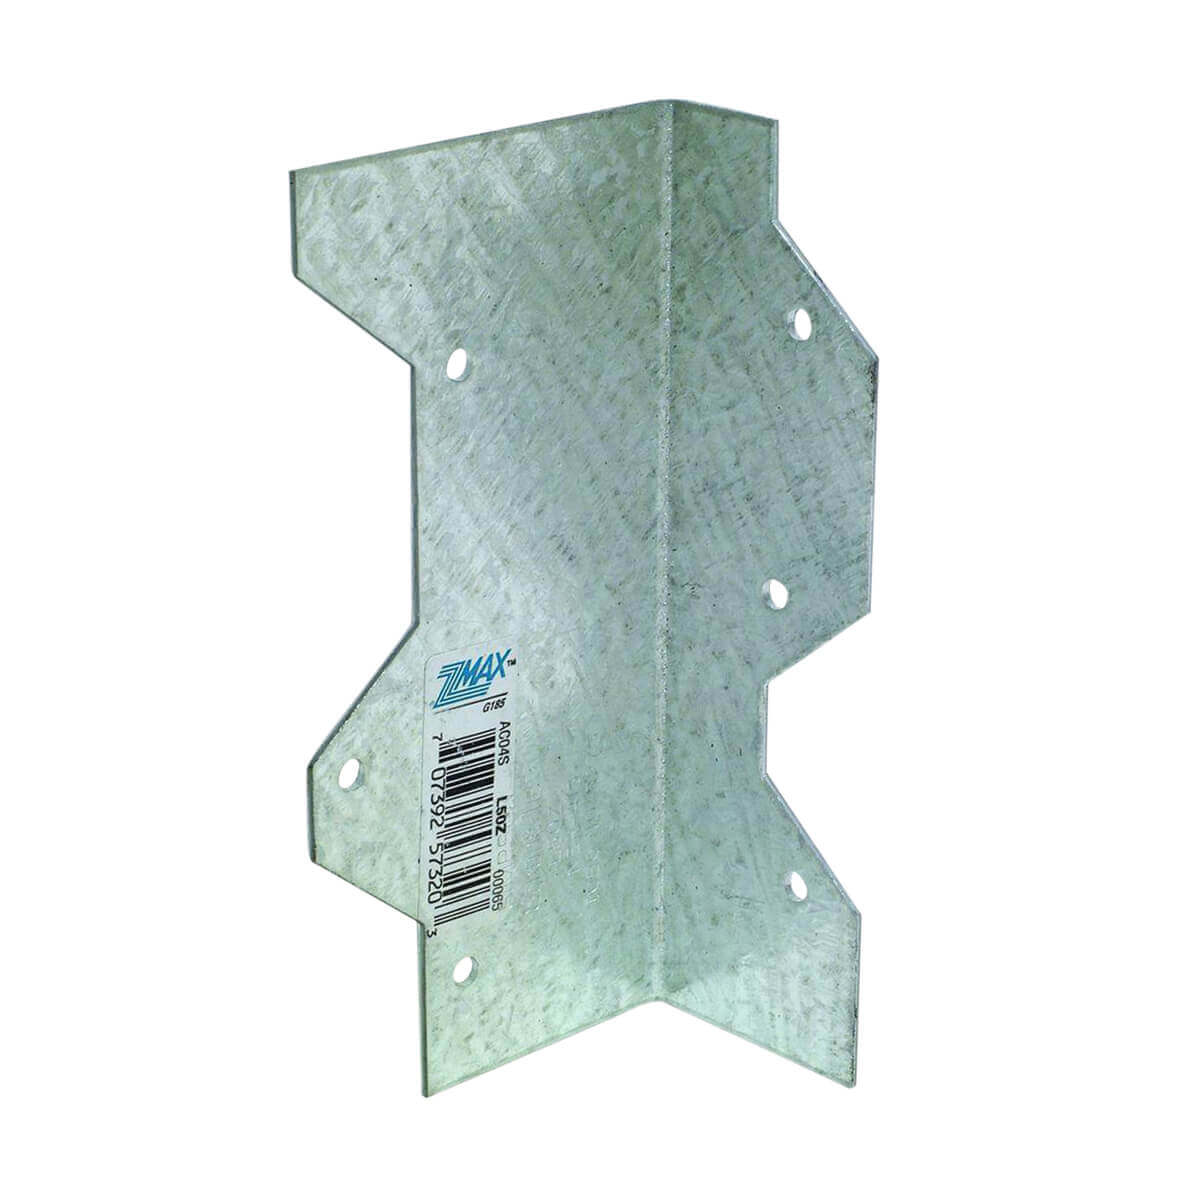 Z-MAX 5-in Galvanized Reinforcing L-Angle - 16 Gauge